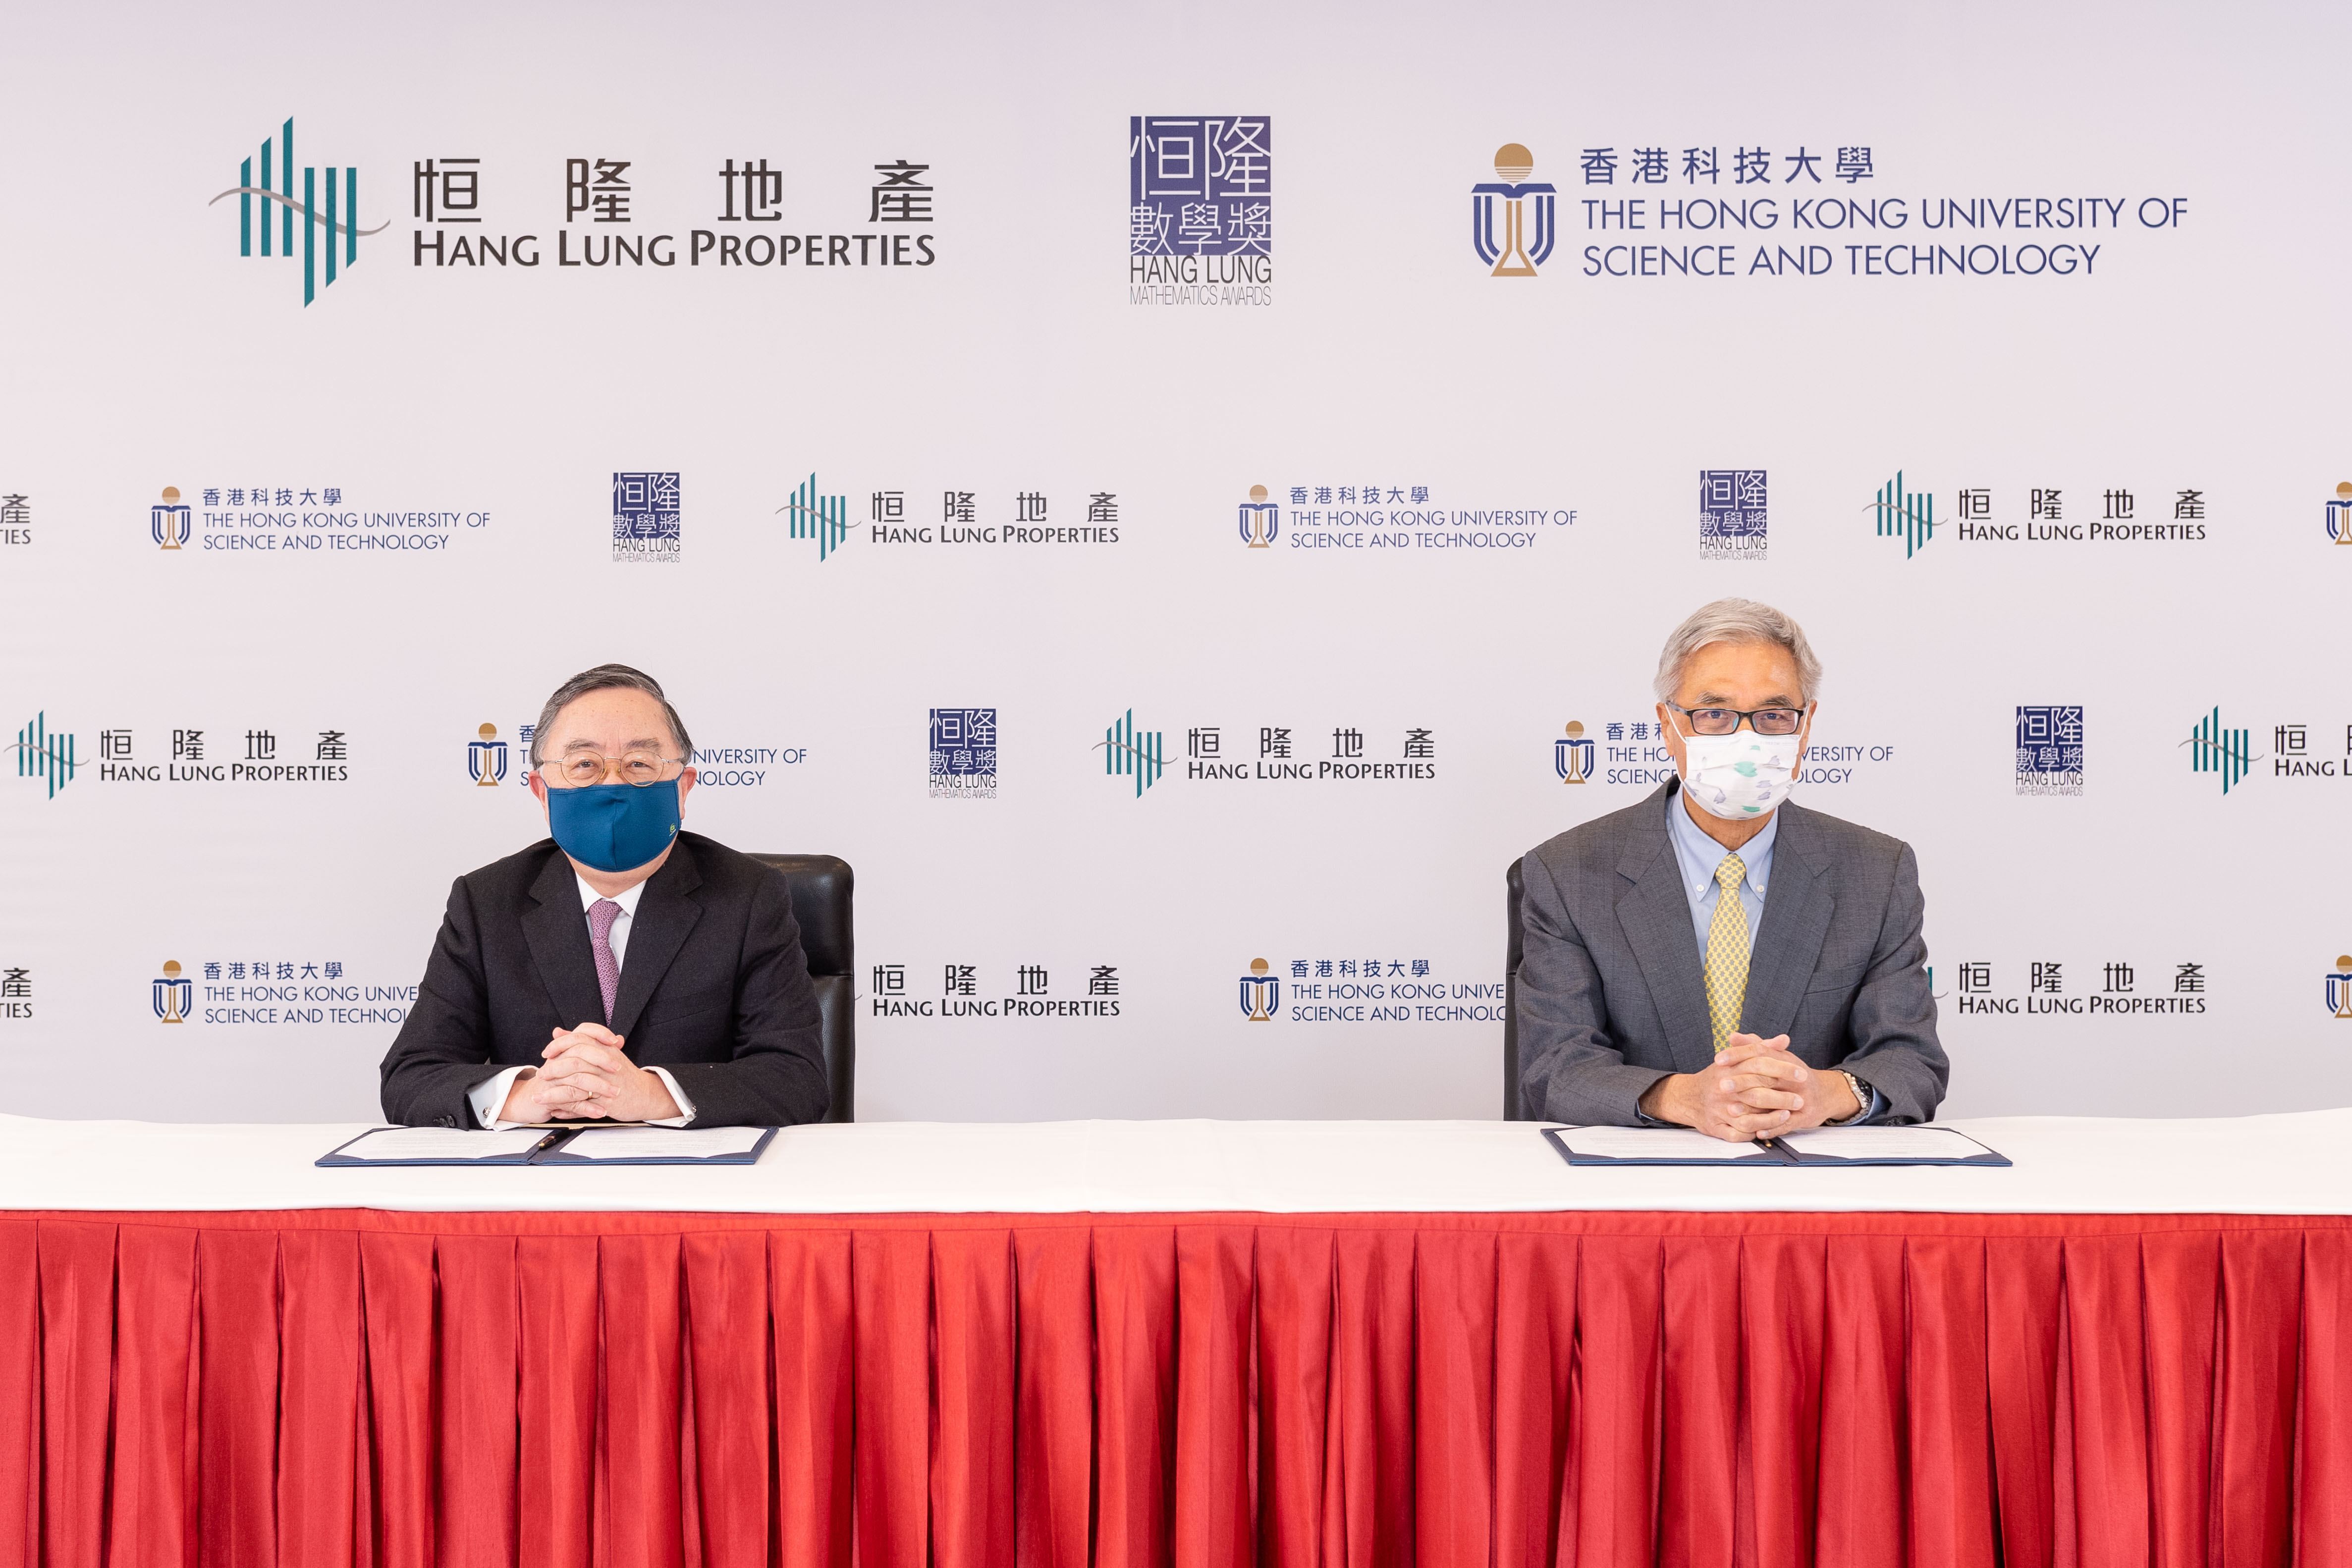  Mr. Ronnie C. CHAN, Chair of Hang Lung Properties, and Professor Wei SHYY, President of HKUST, announcing their partnership to co-organize HLMA and nurture talented young mathematics and science students in Hong Kong